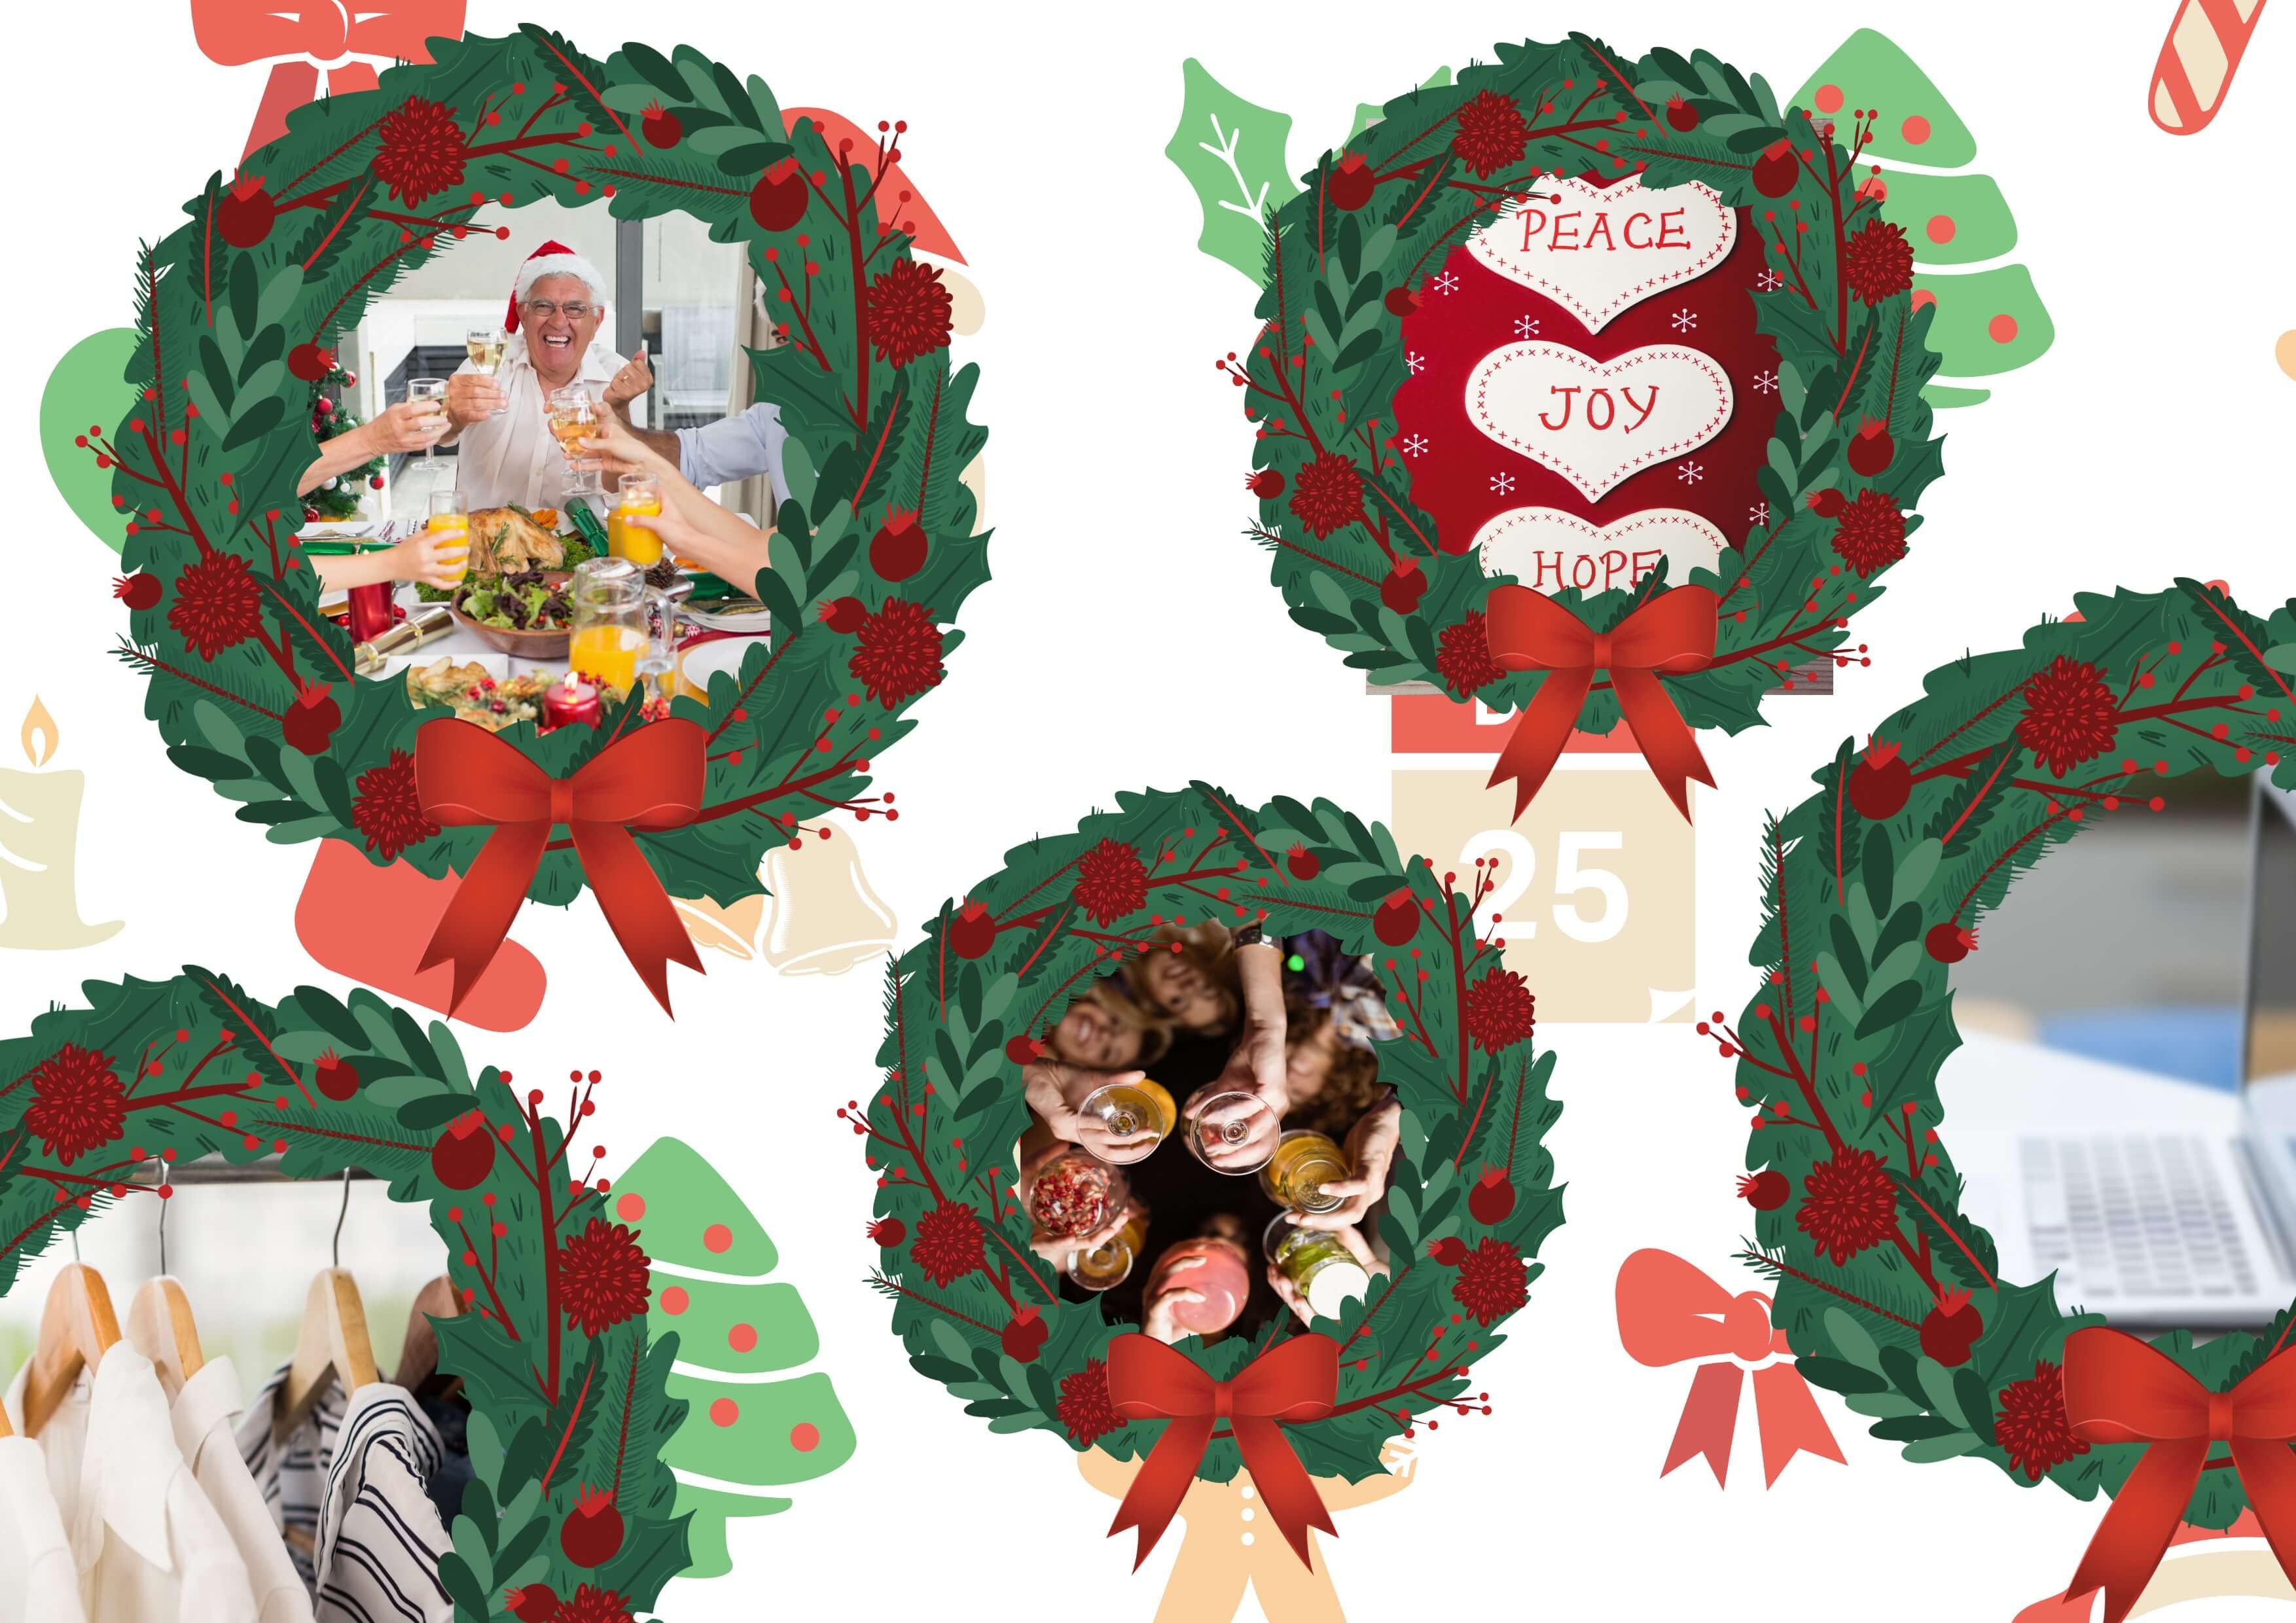 Christmas Wish List Collage with Images surrounded by Wreath Borders, along with a Christmas icon Background - How to make a collage: A complete inspirational guide with examples - Image